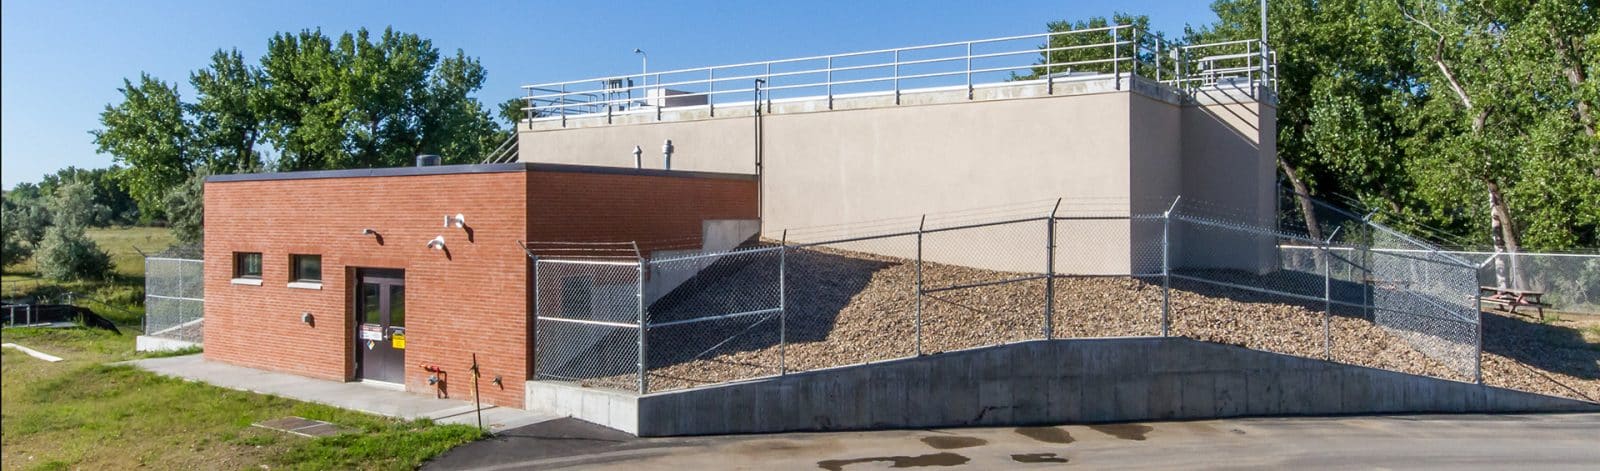 Pre-Sedimentation Solutions and Benefits for Water Treatment Facilities